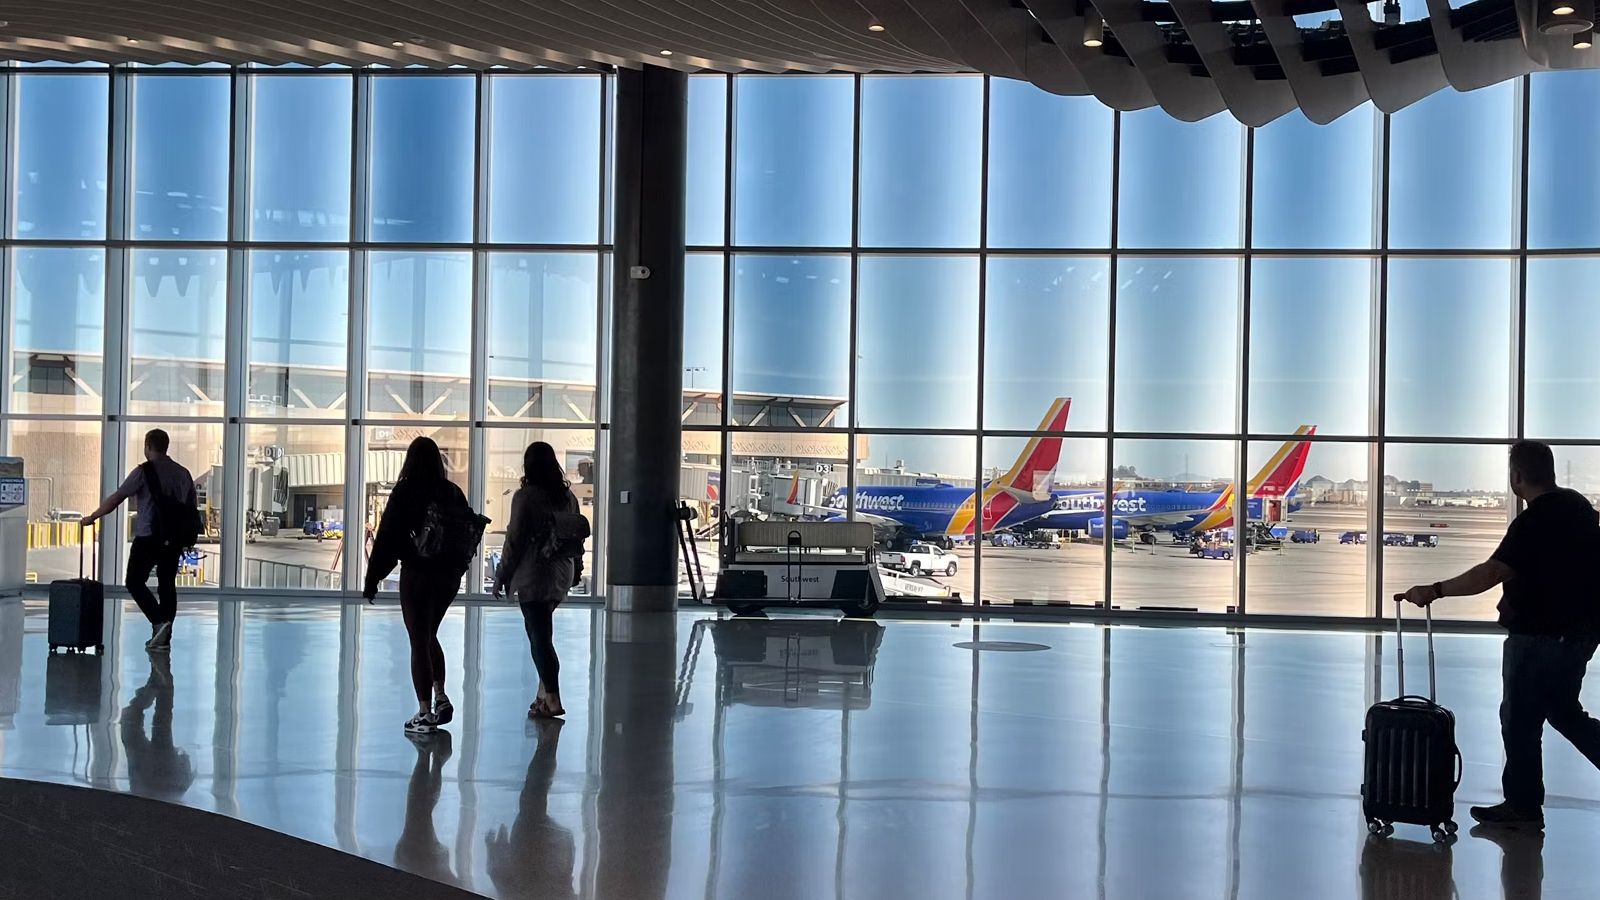 Passengers moving about an airport terminal near a window, where two Southwest Airlines aircraft can be seen on the apron.